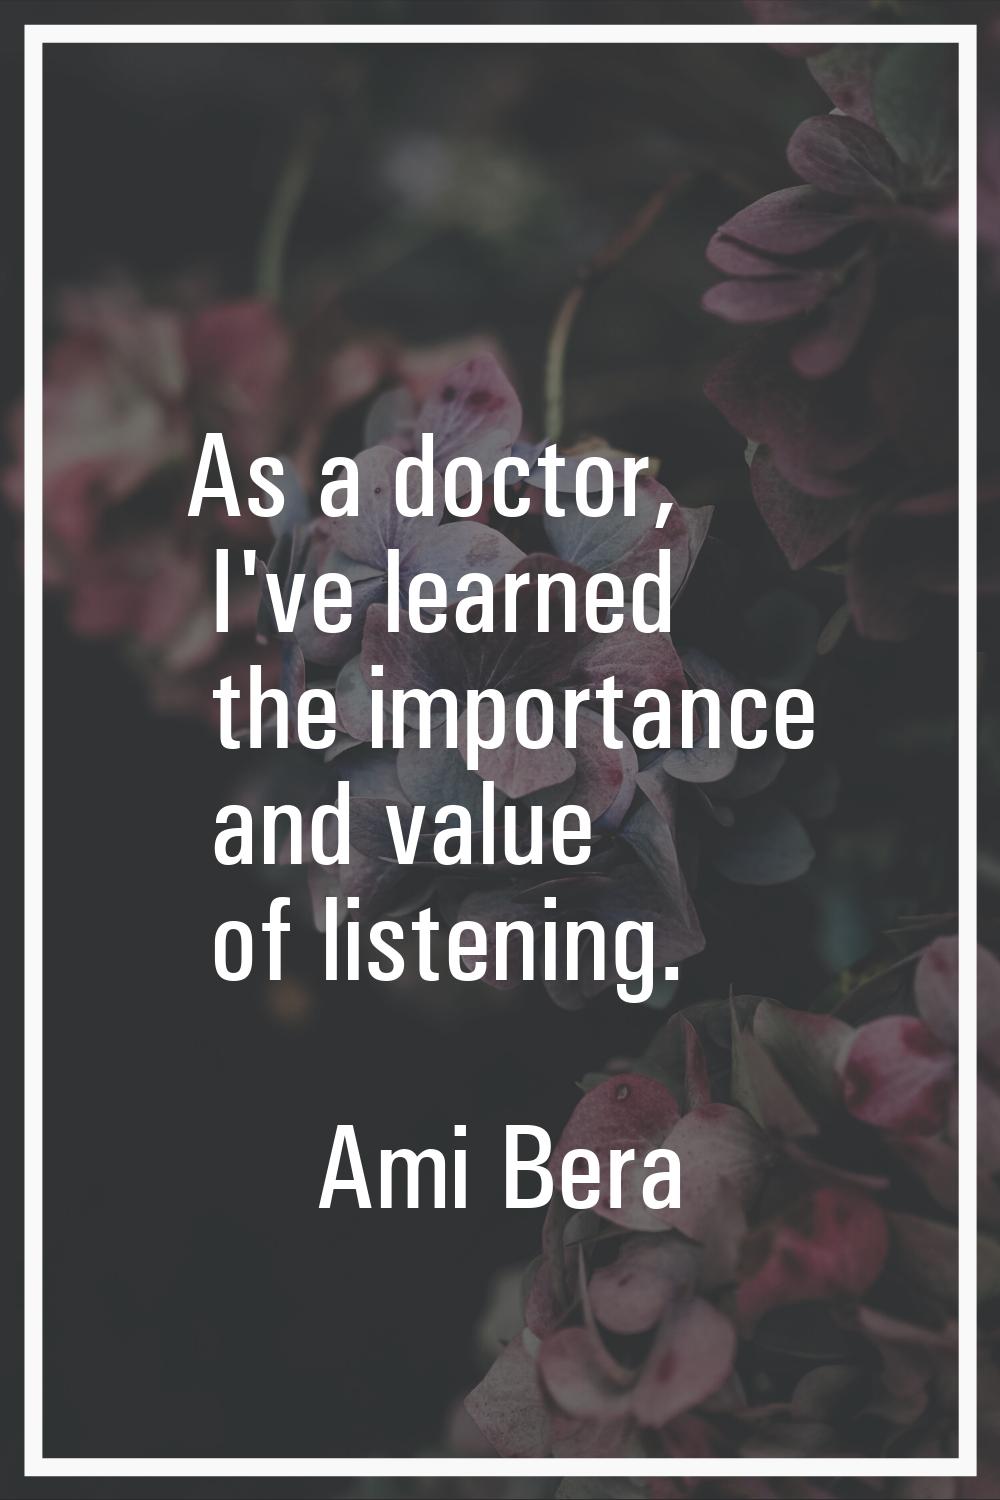 As a doctor, I've learned the importance and value of listening.